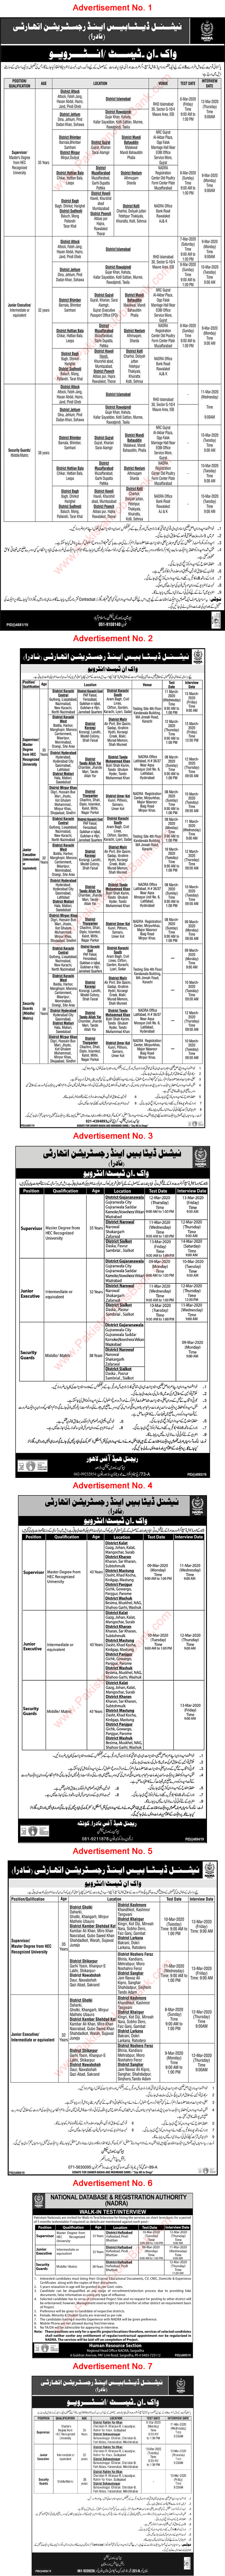 NADRA Jobs February 2020 March Walk in Test / Interview Junior Executive, Supervisors & Security Guards Latest